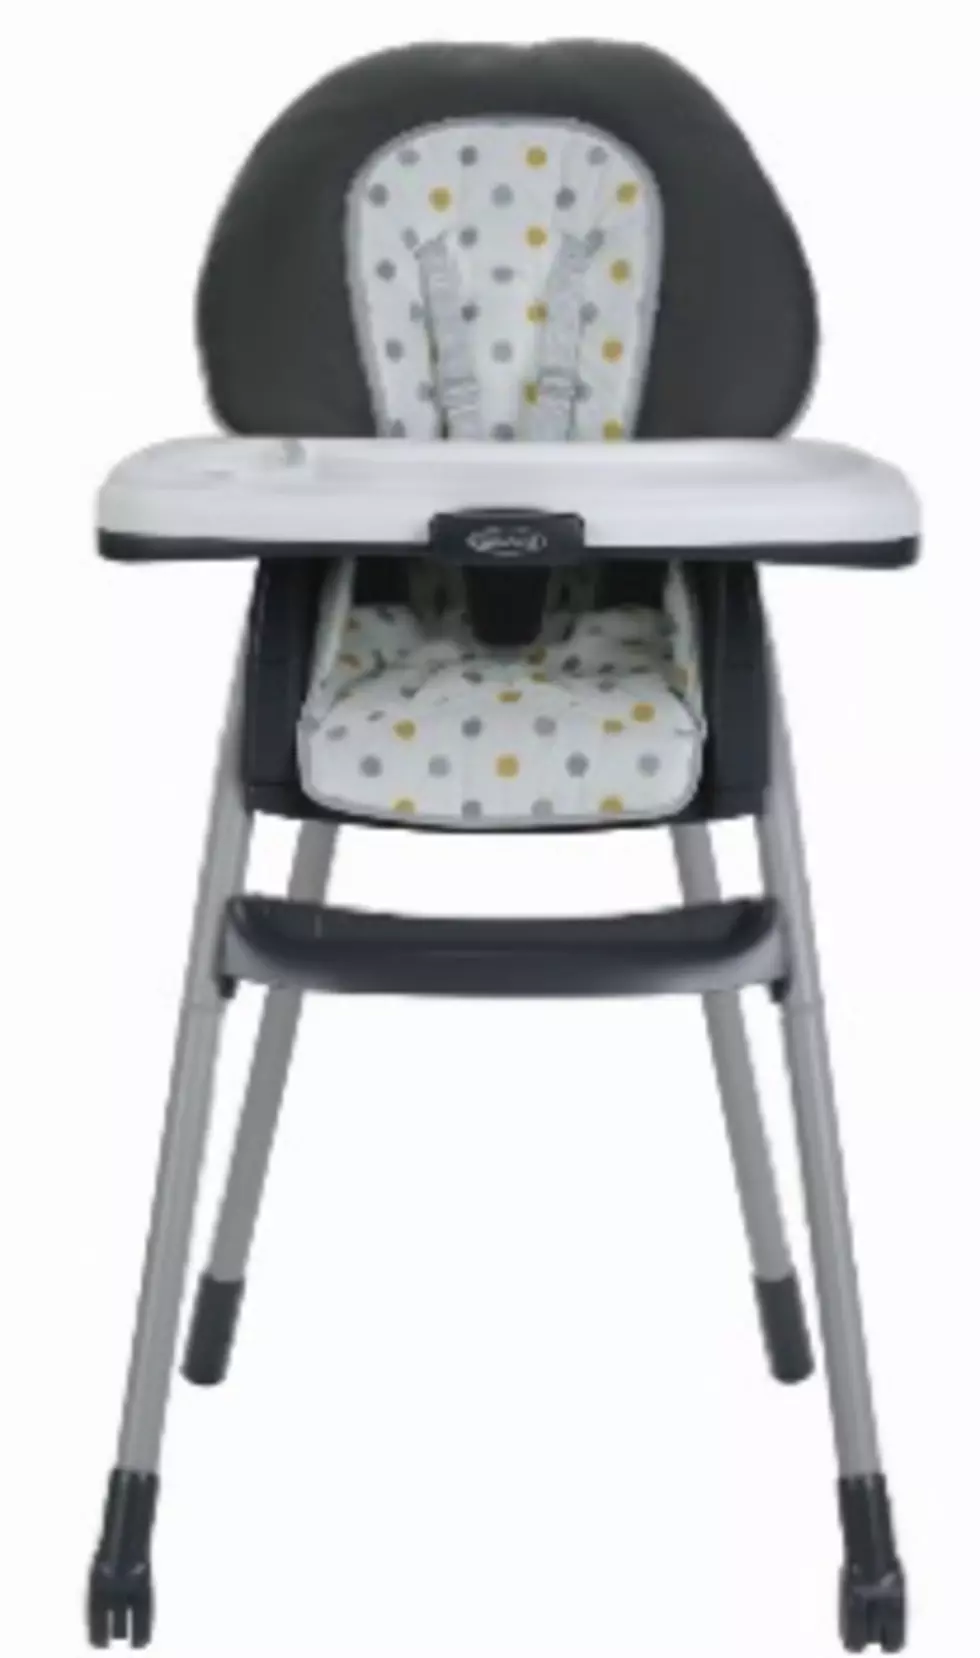 Graco Recalls Highchair Sold At Walmart in the US and Canada